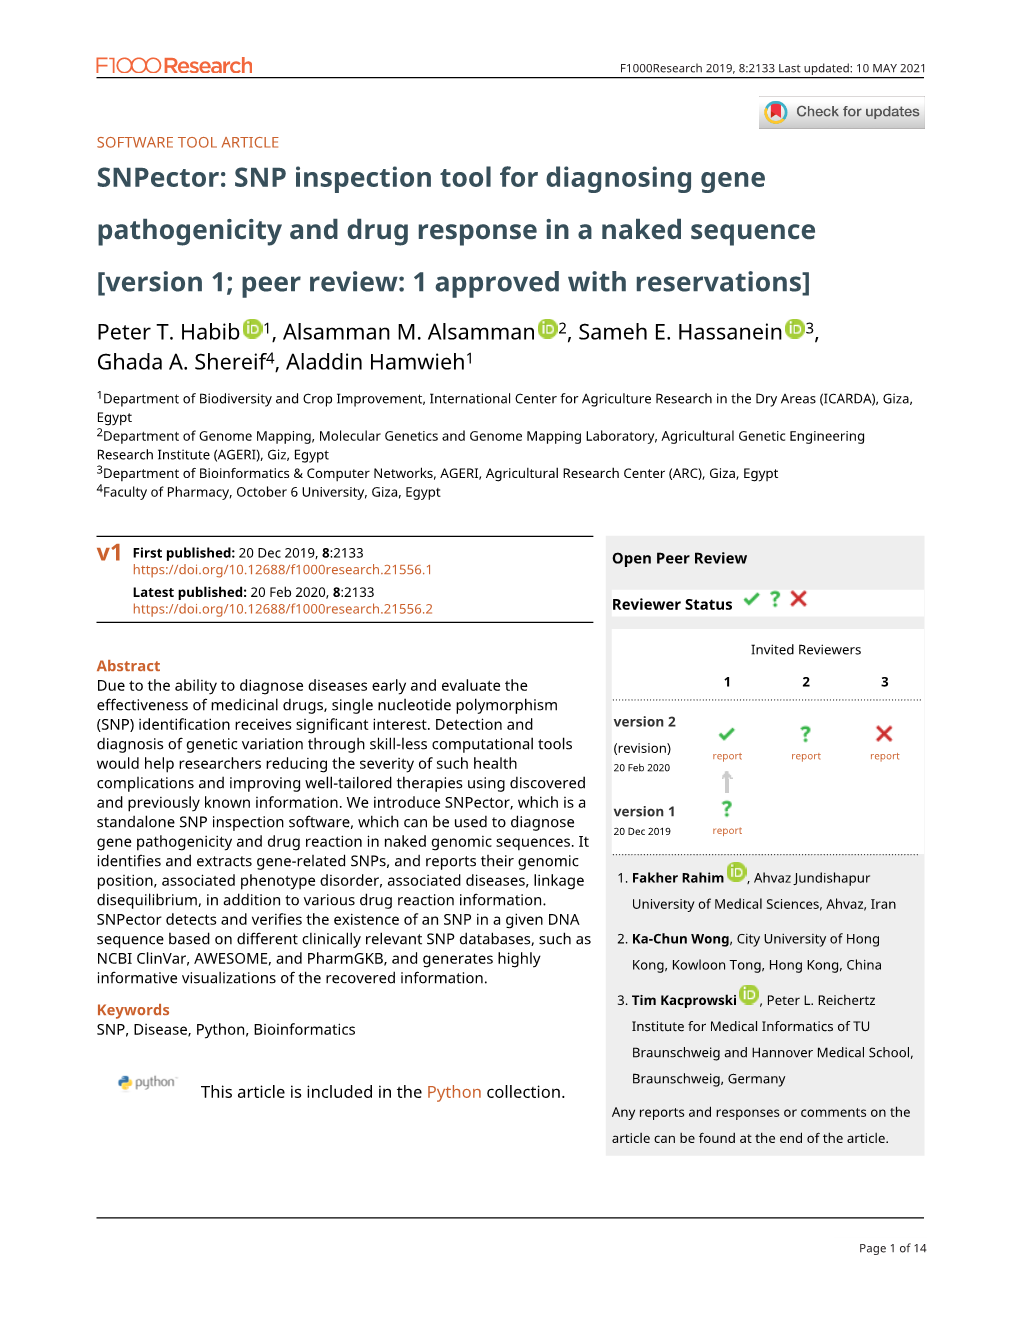 SNP Inspection Tool for Diagnosing Gene Pathogenicity and Drug Response in a Naked Sequence [Version 1; Peer Review: 1 Approved with Reservations]